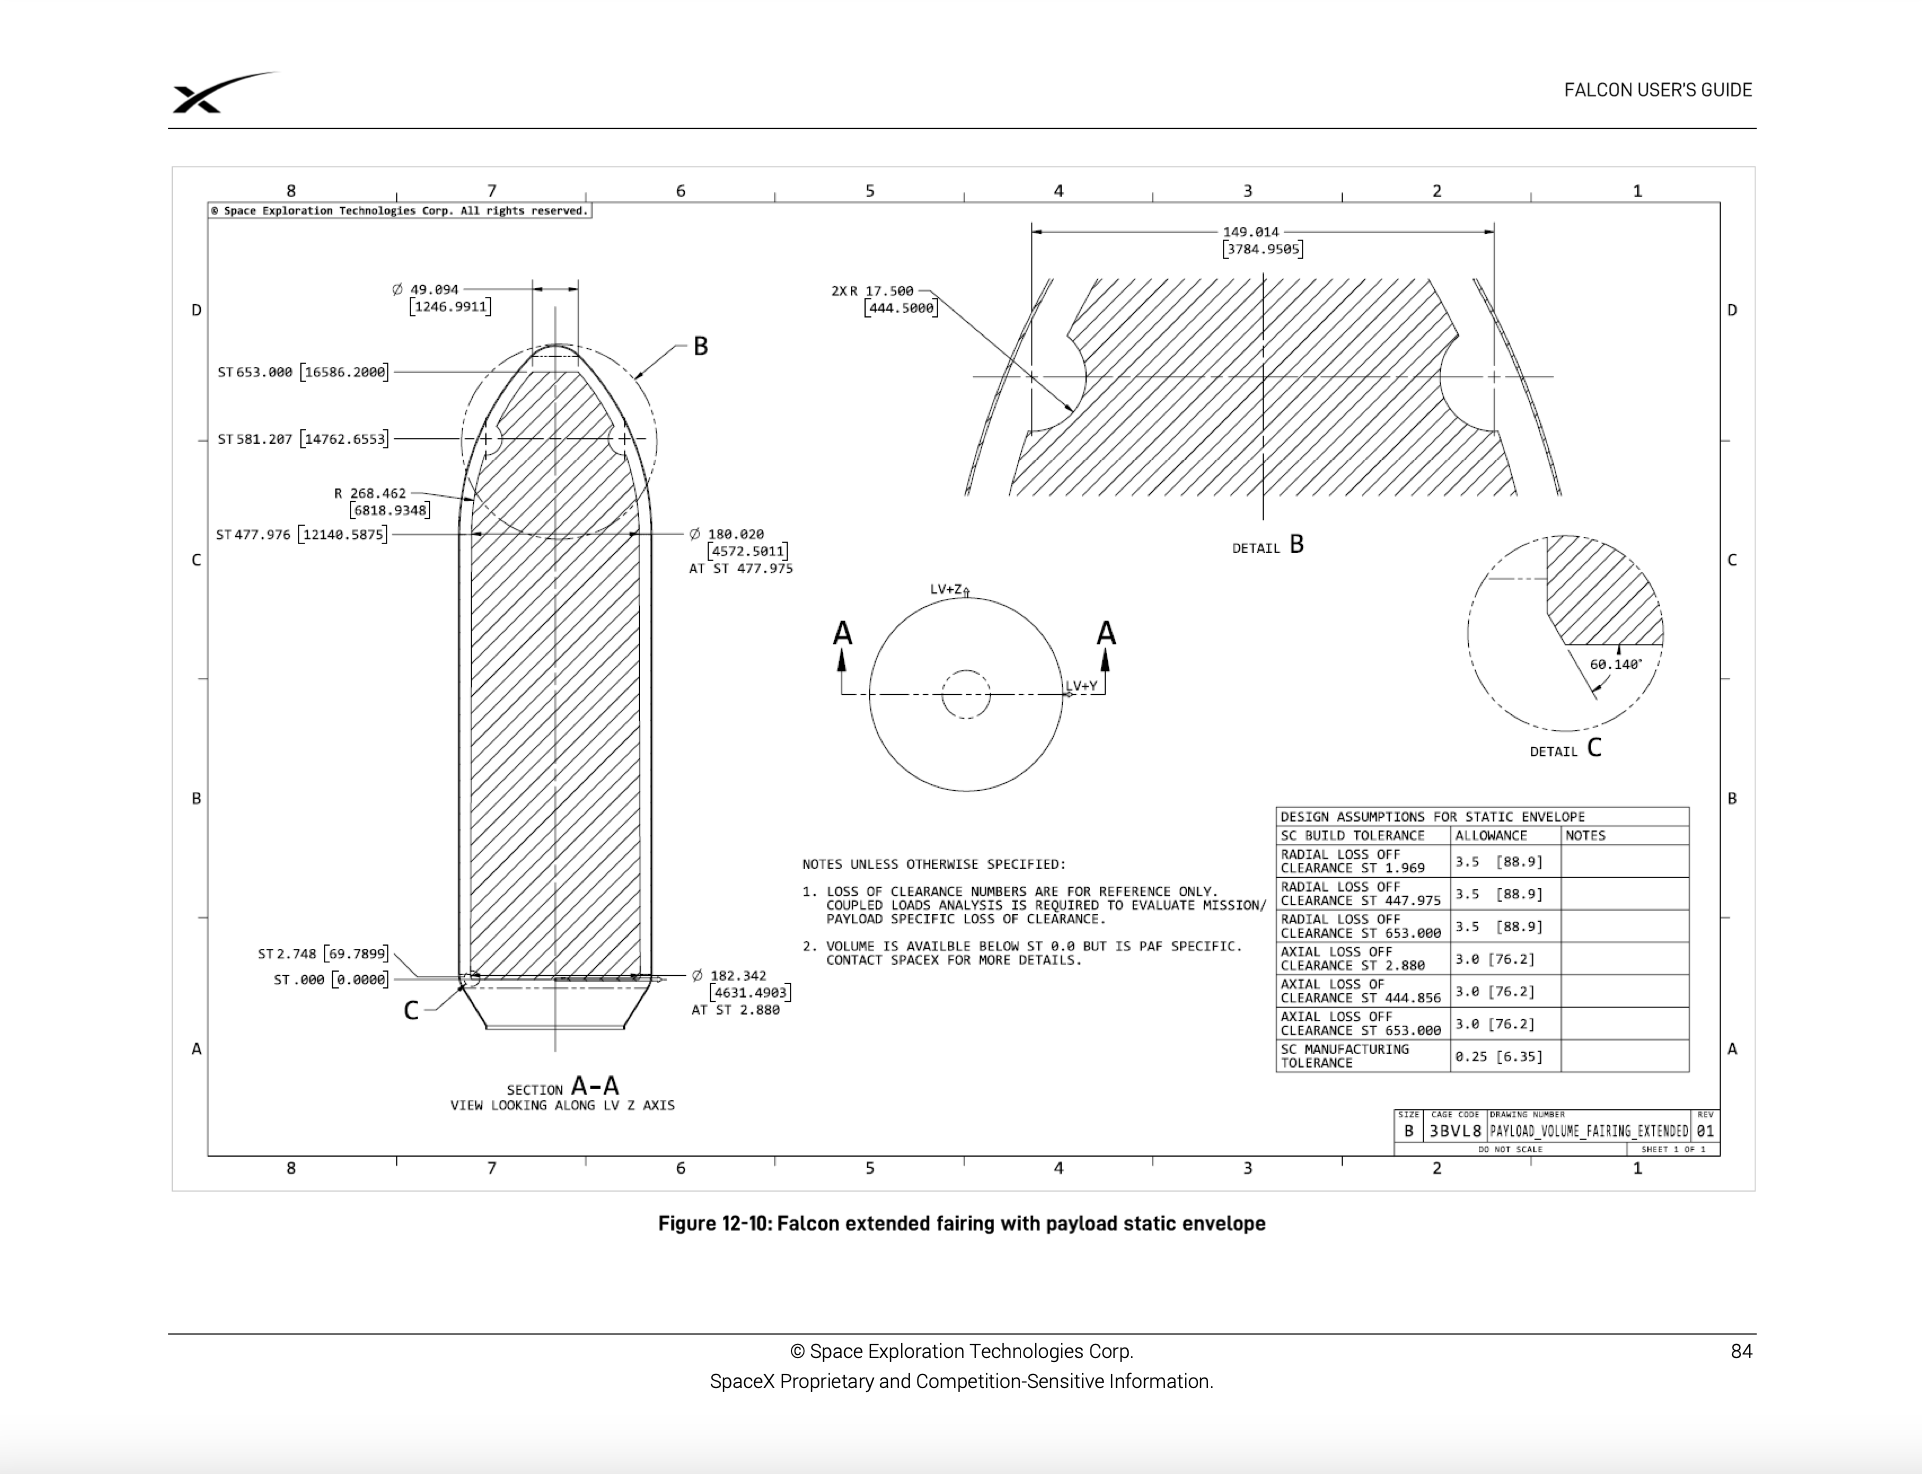 Falcon extended payload fairing payload diagram